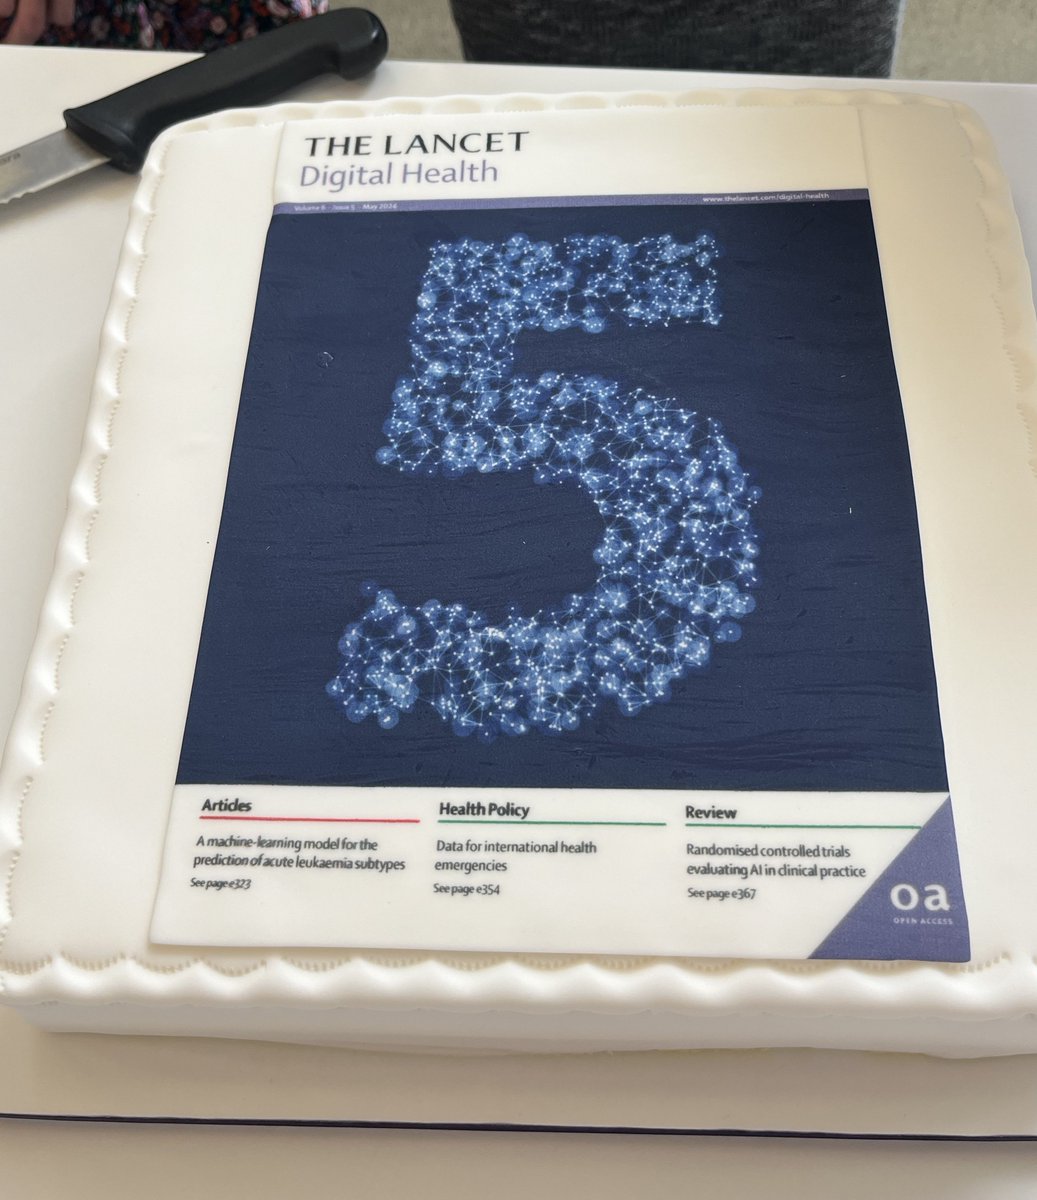 It's our 5th birthday! Read our Editorial for our reflections on the last five years of #DigitalHealth research. We look forward to championing equity, transparency and inclusivity in the field over next five years with our authors, reviewers and readers. thelancet.com/journals/landi…